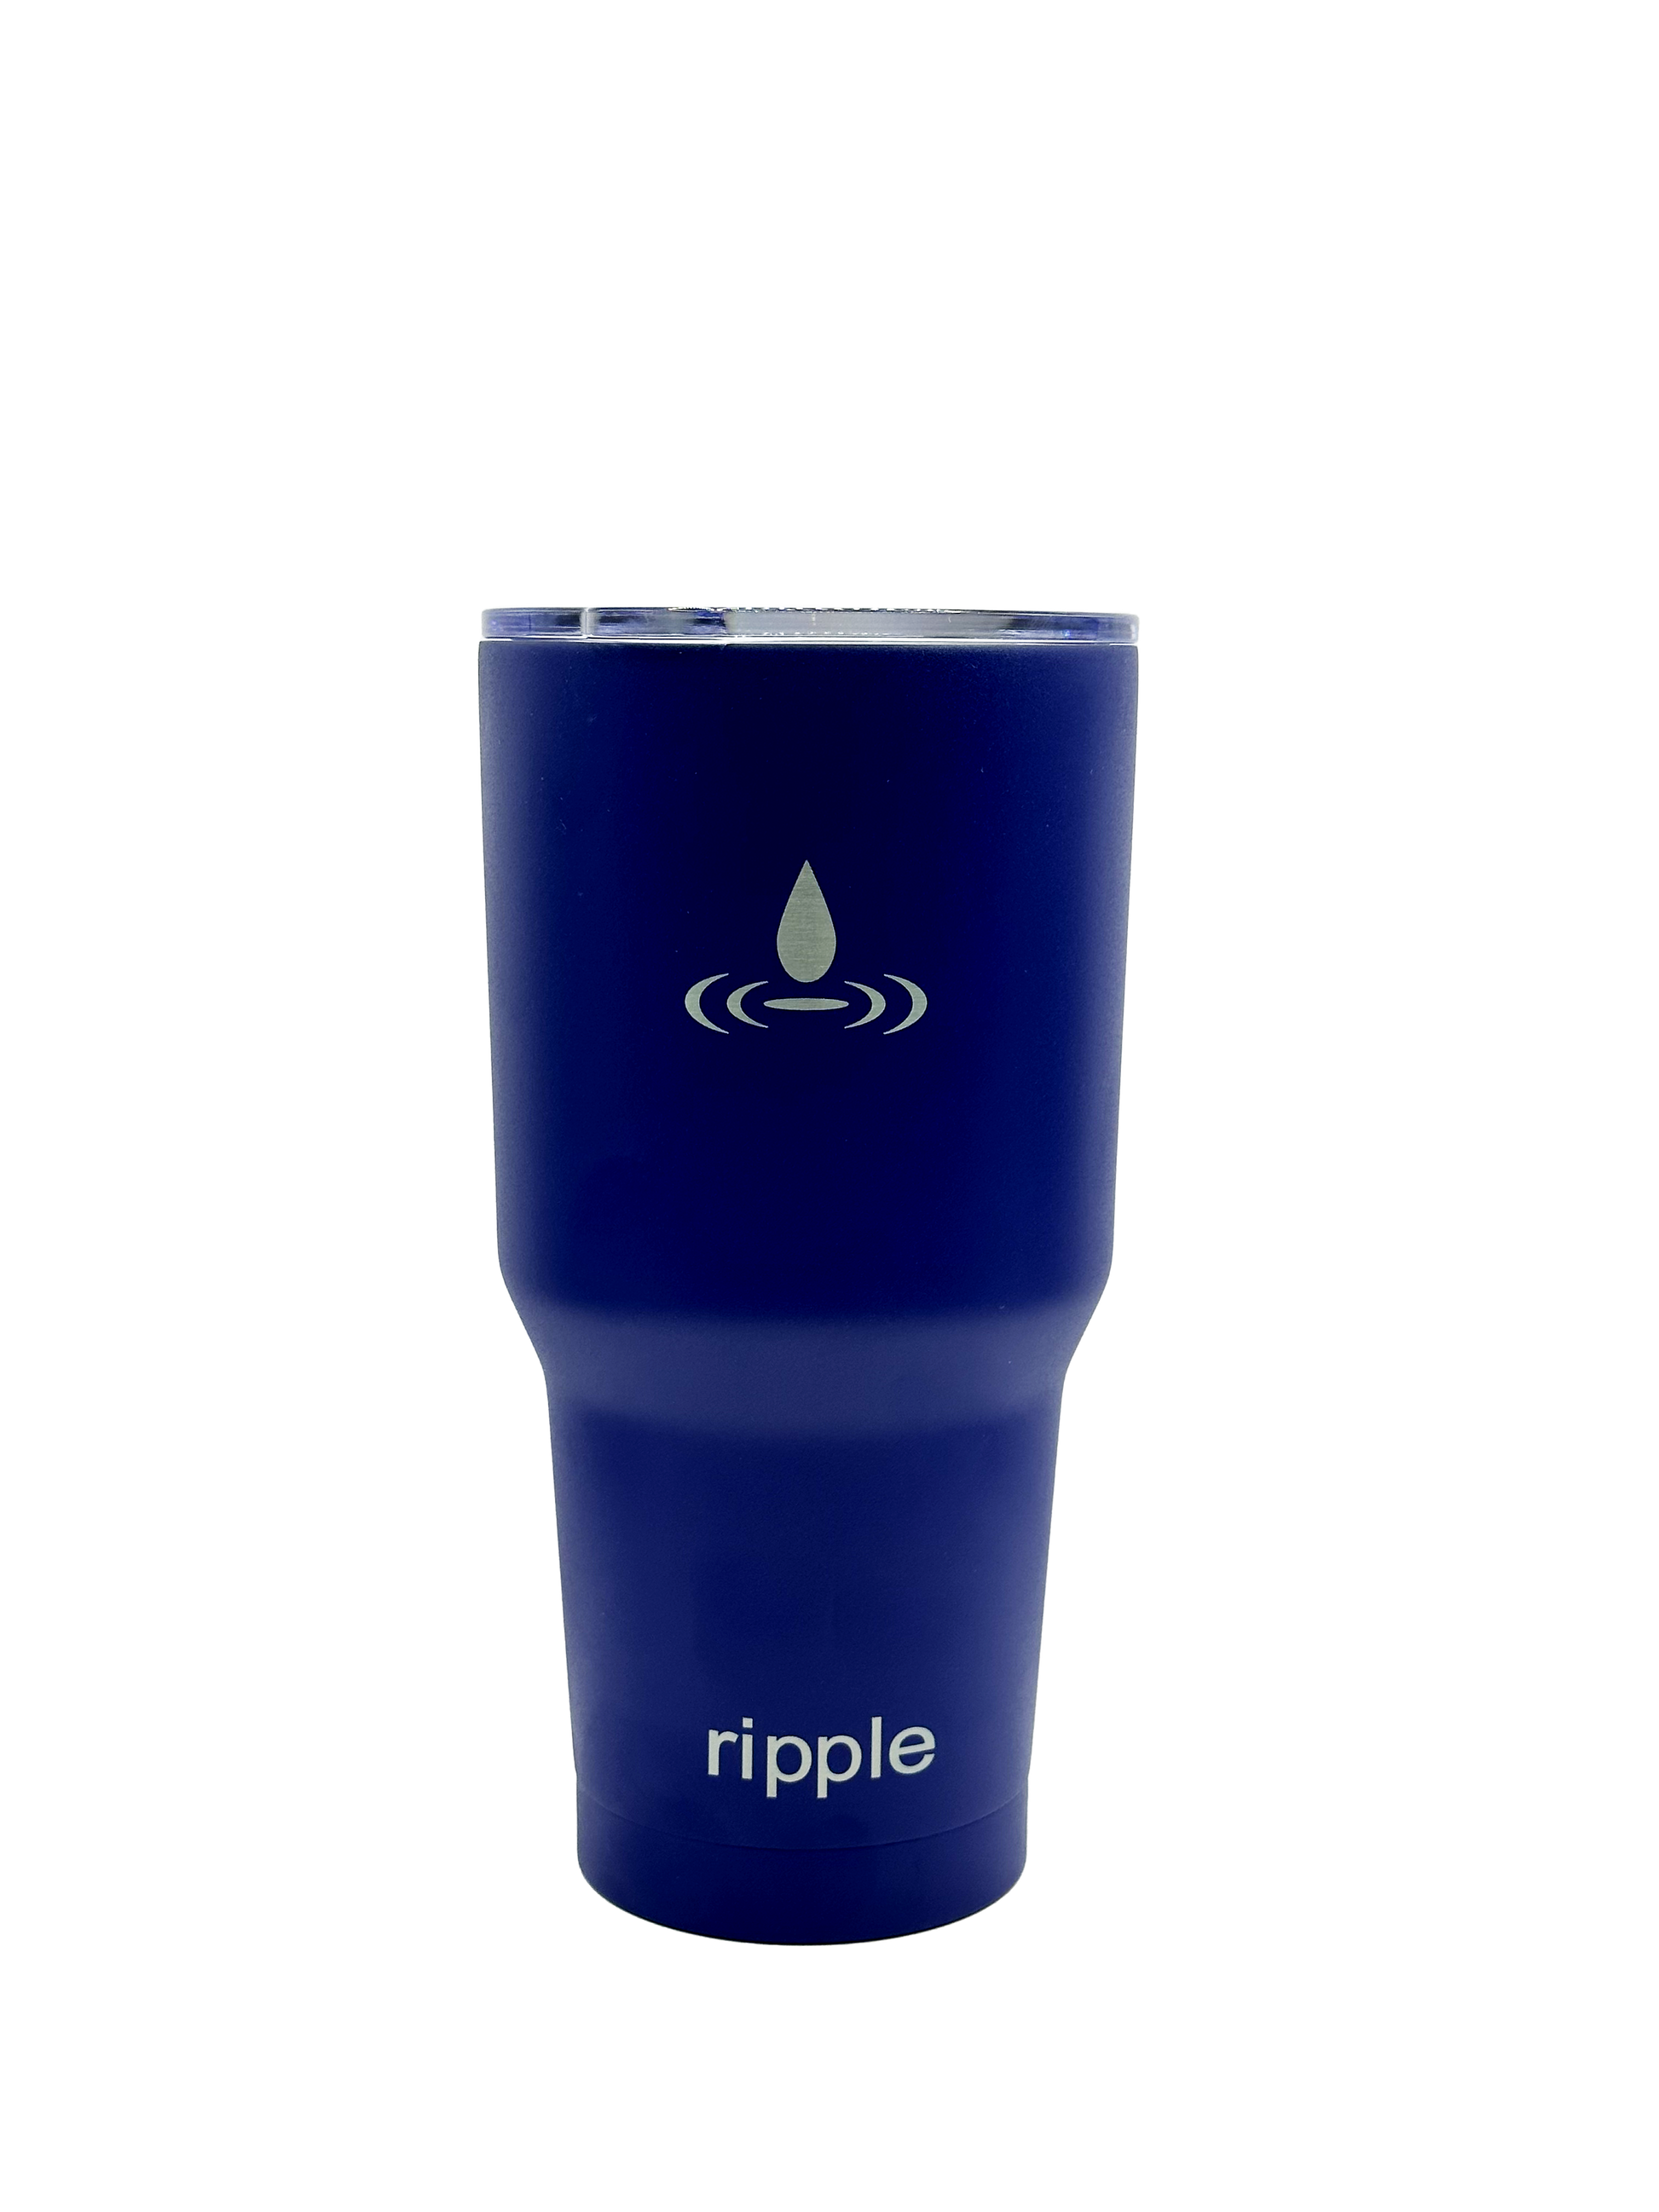 Free Shipping to US Custom Engraved RTIC Tumblers 20, 30, or 40 Oz